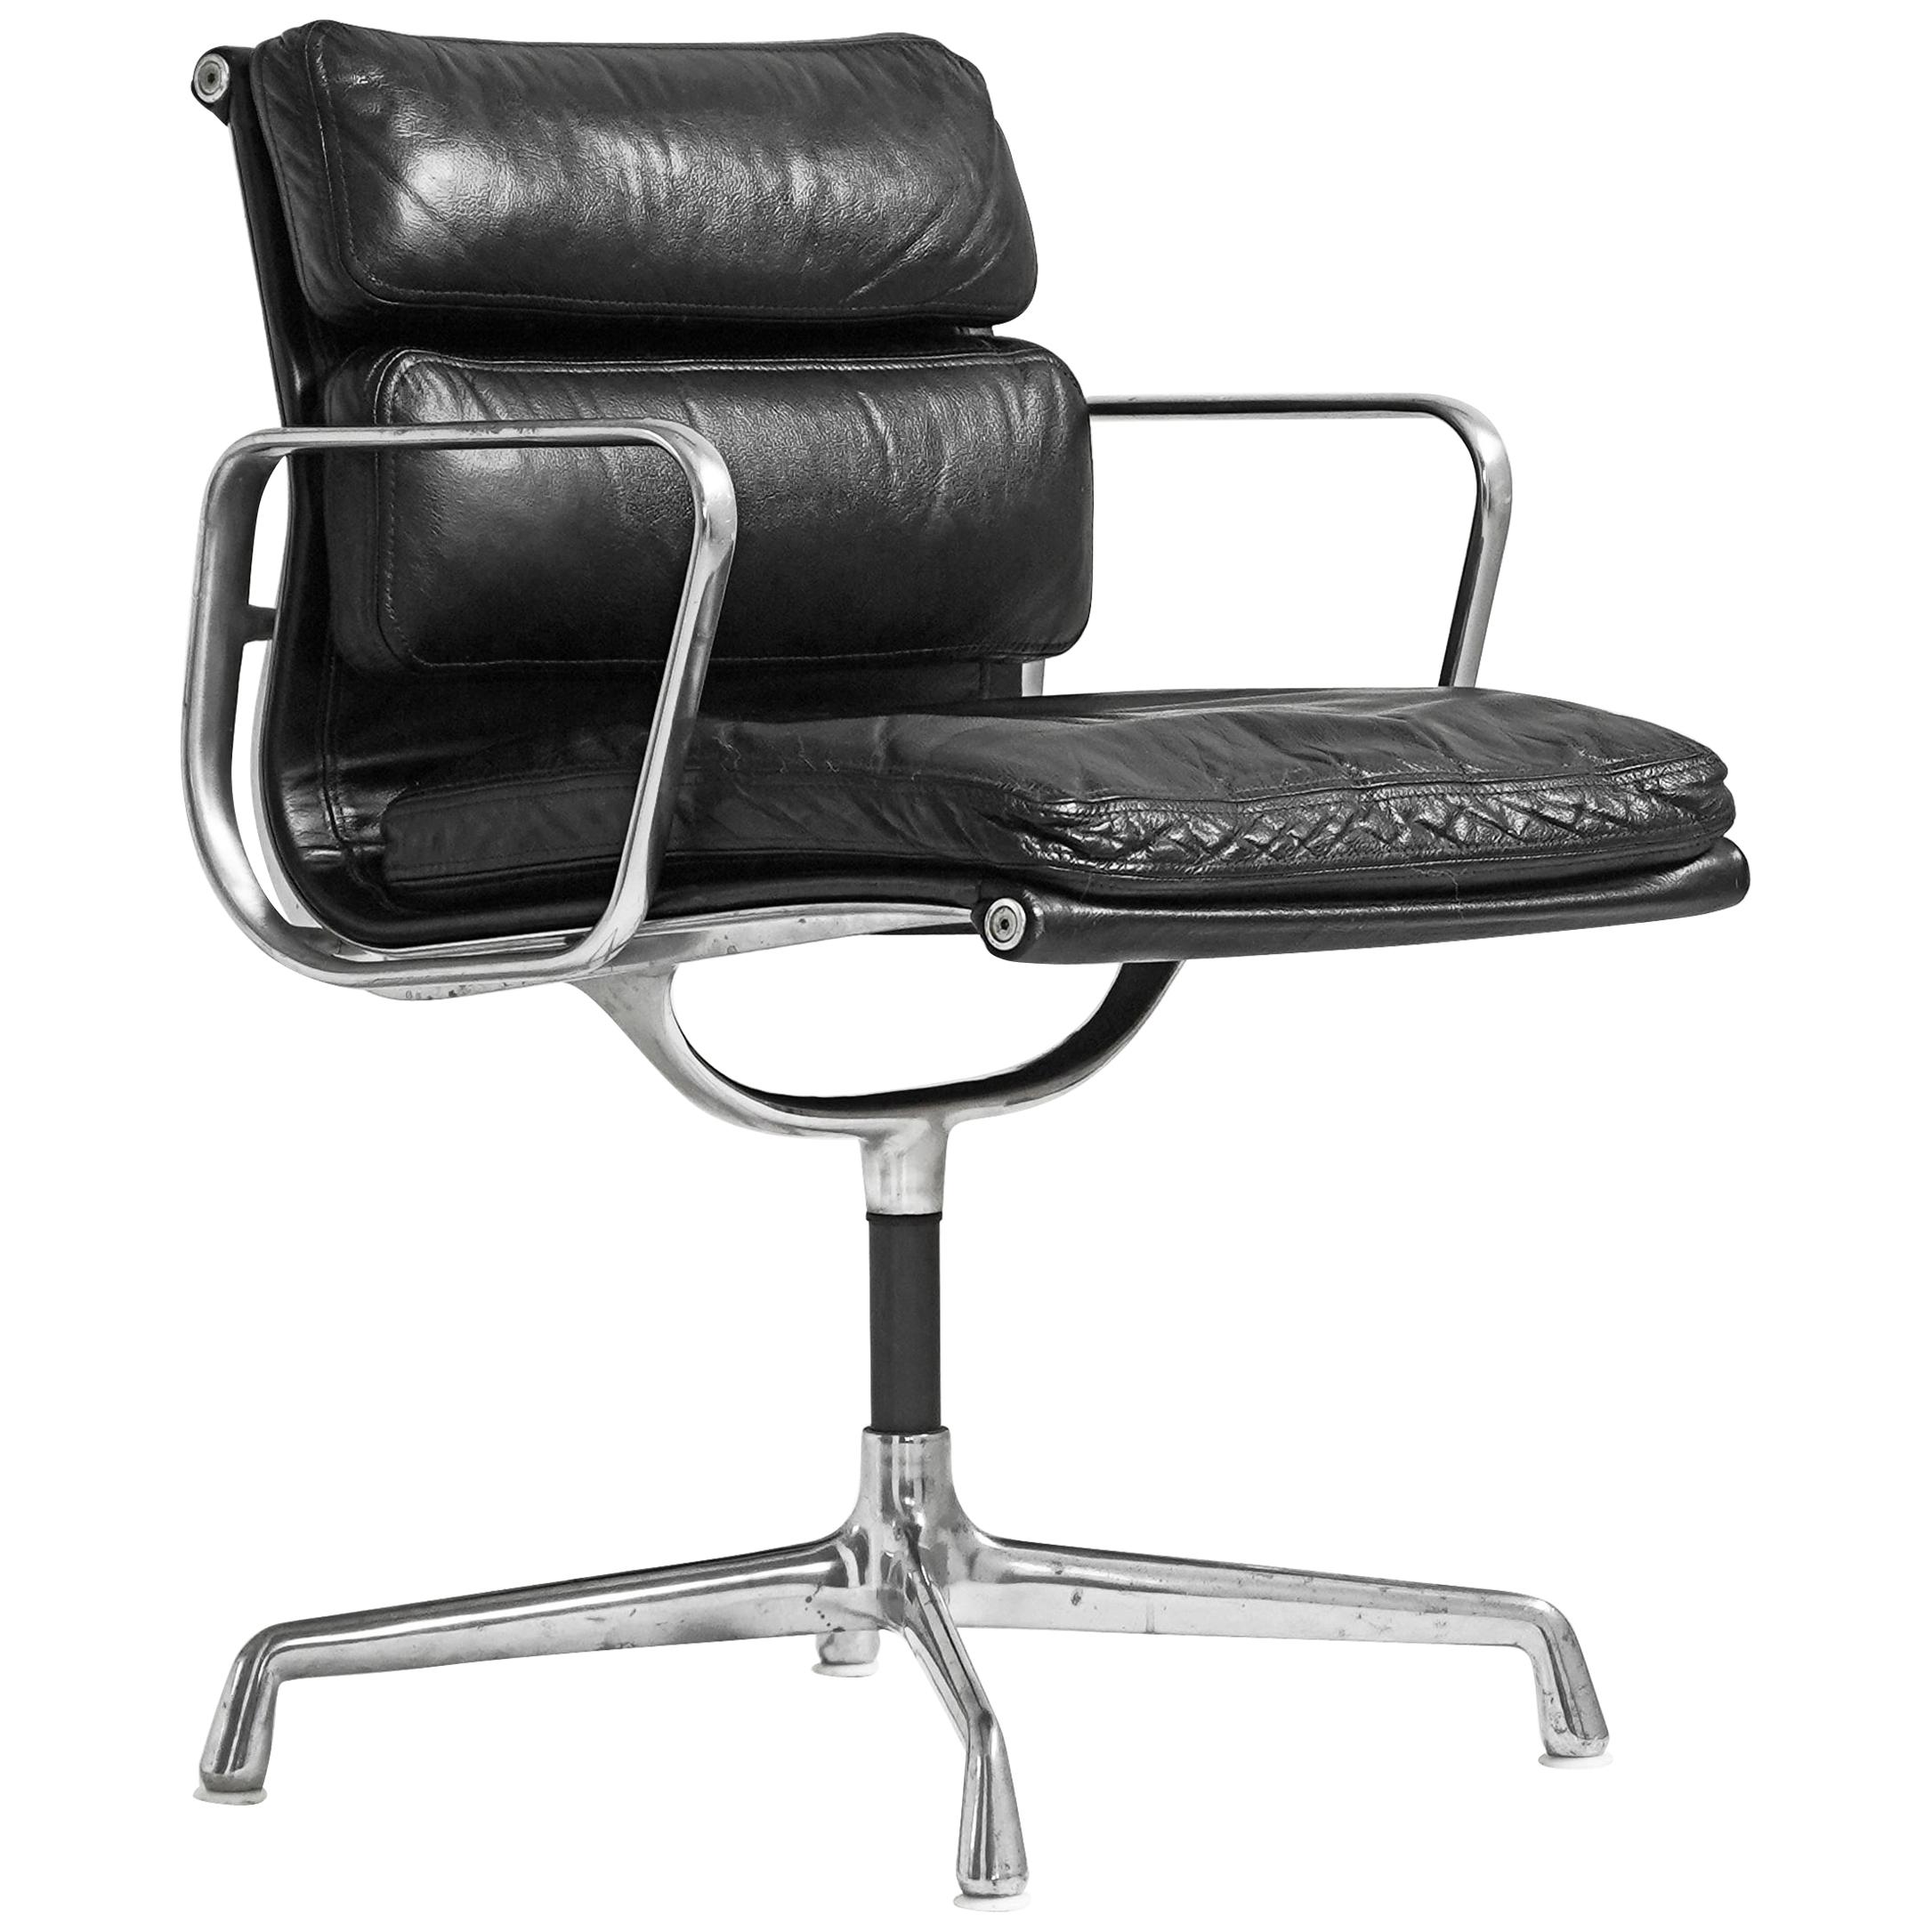 Eames Soft Pad Management Chair by Charles and Ray Eames for Herman Miller